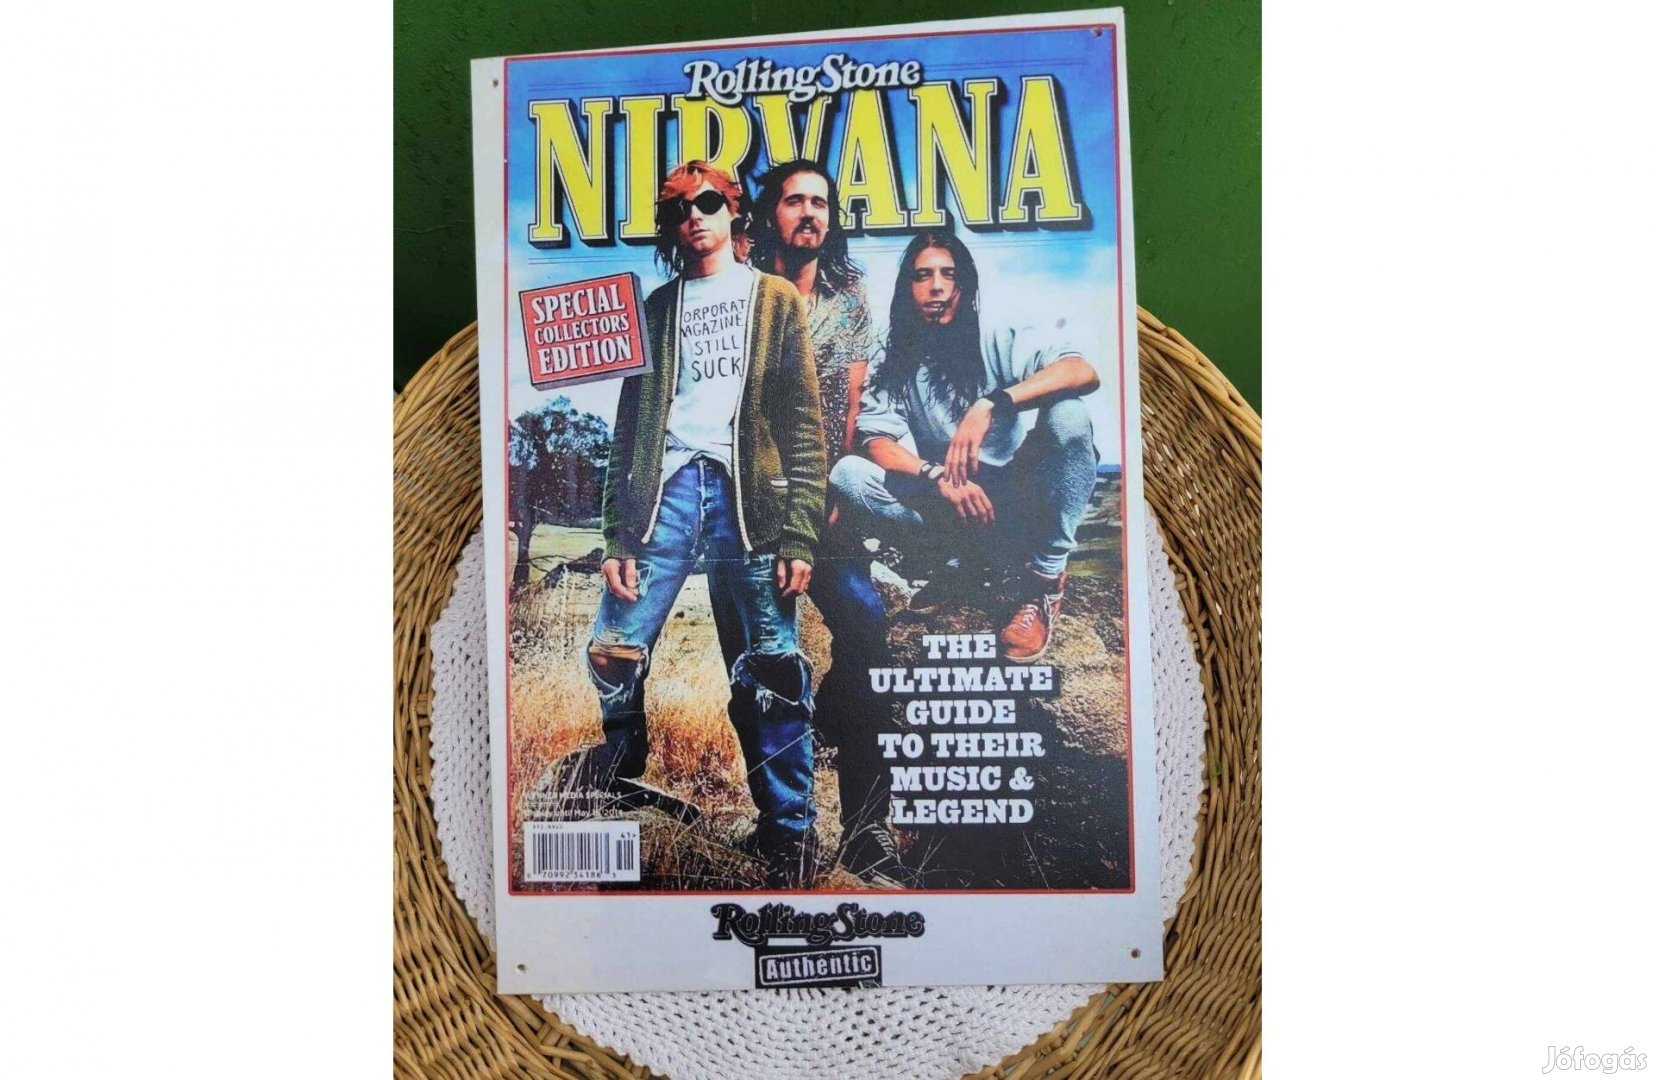 Rolling Stone magazine 2014, Nirvana Ultimate Guide, Special-plakát